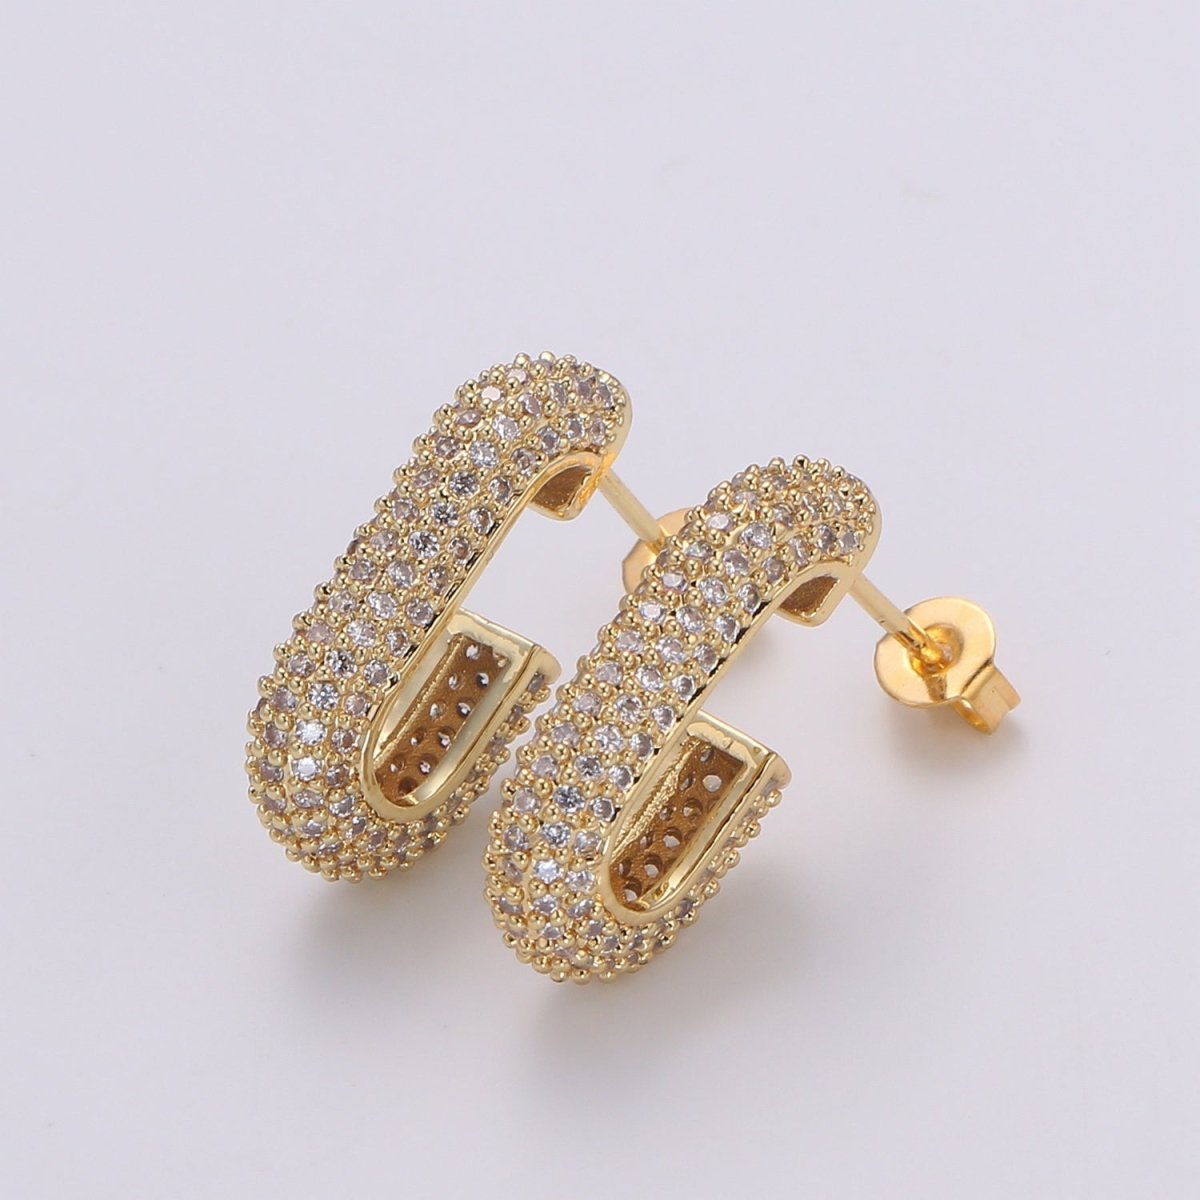 24K Gold Full Pave CZ Stud Earring, White Gold filled Micro Pave Earring Bold Earring Statement Earring Chunky Q-513 Q-514 - DLUXCA